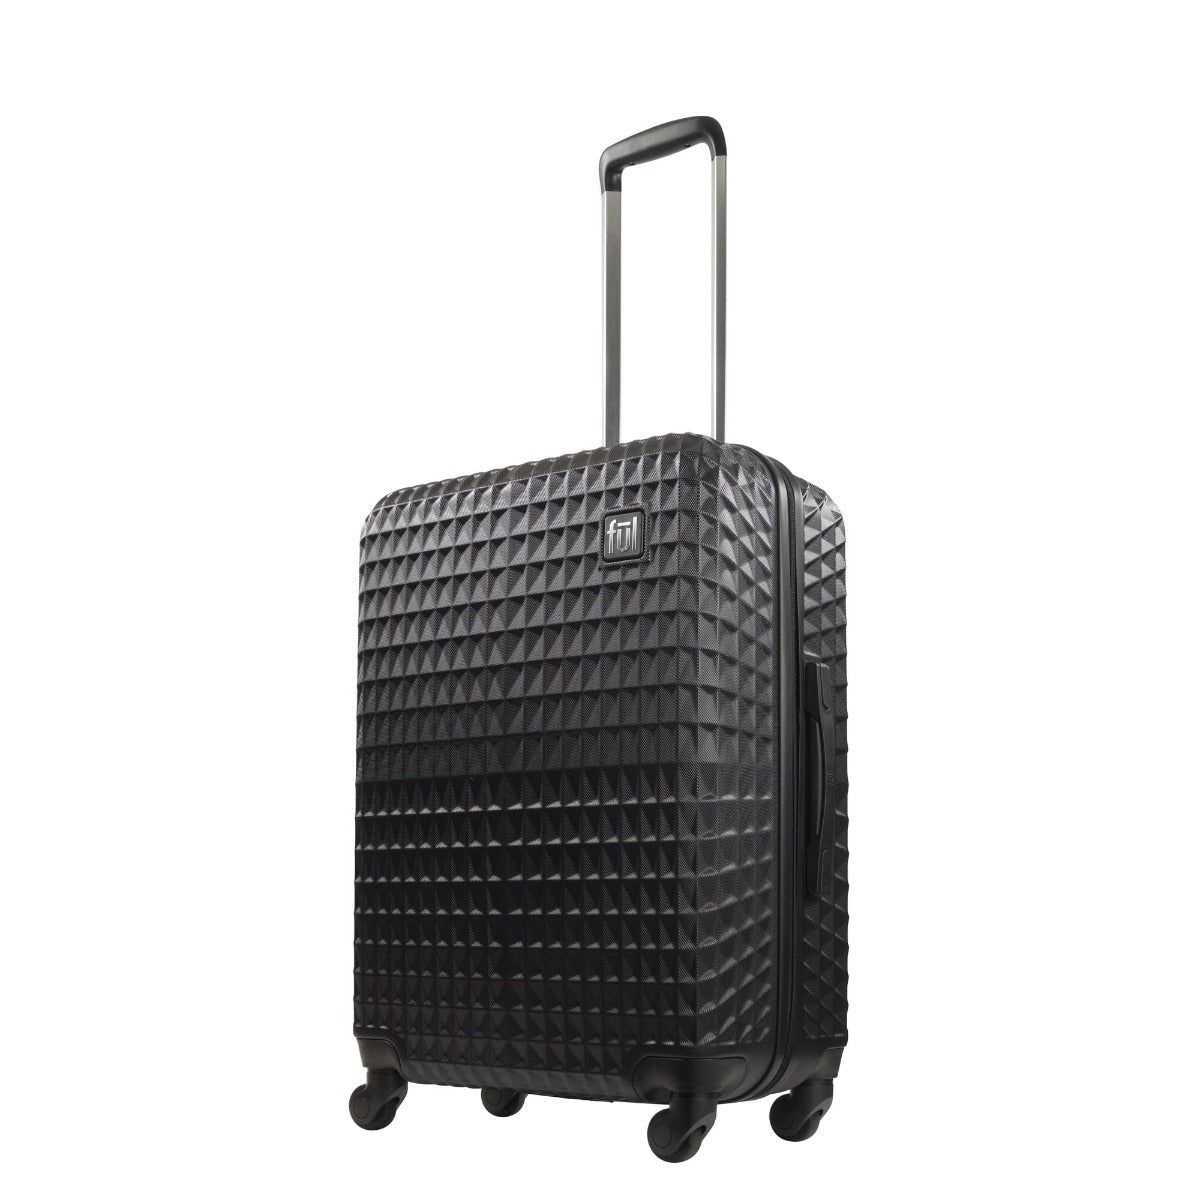 Ful Geo 26" checked bag hard sided spinner suitcase luggage black